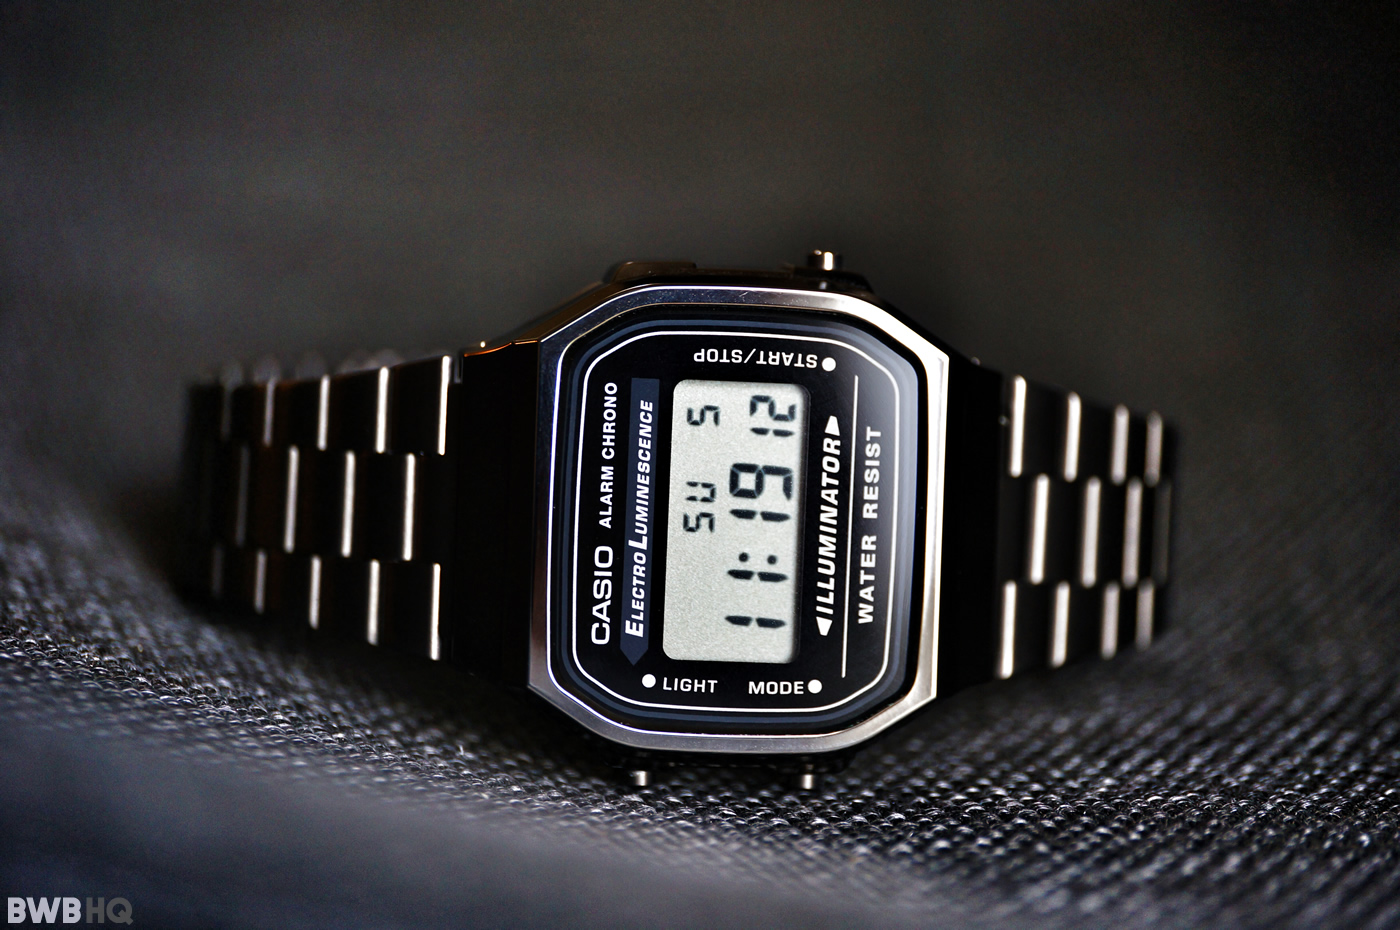 casio a158 review